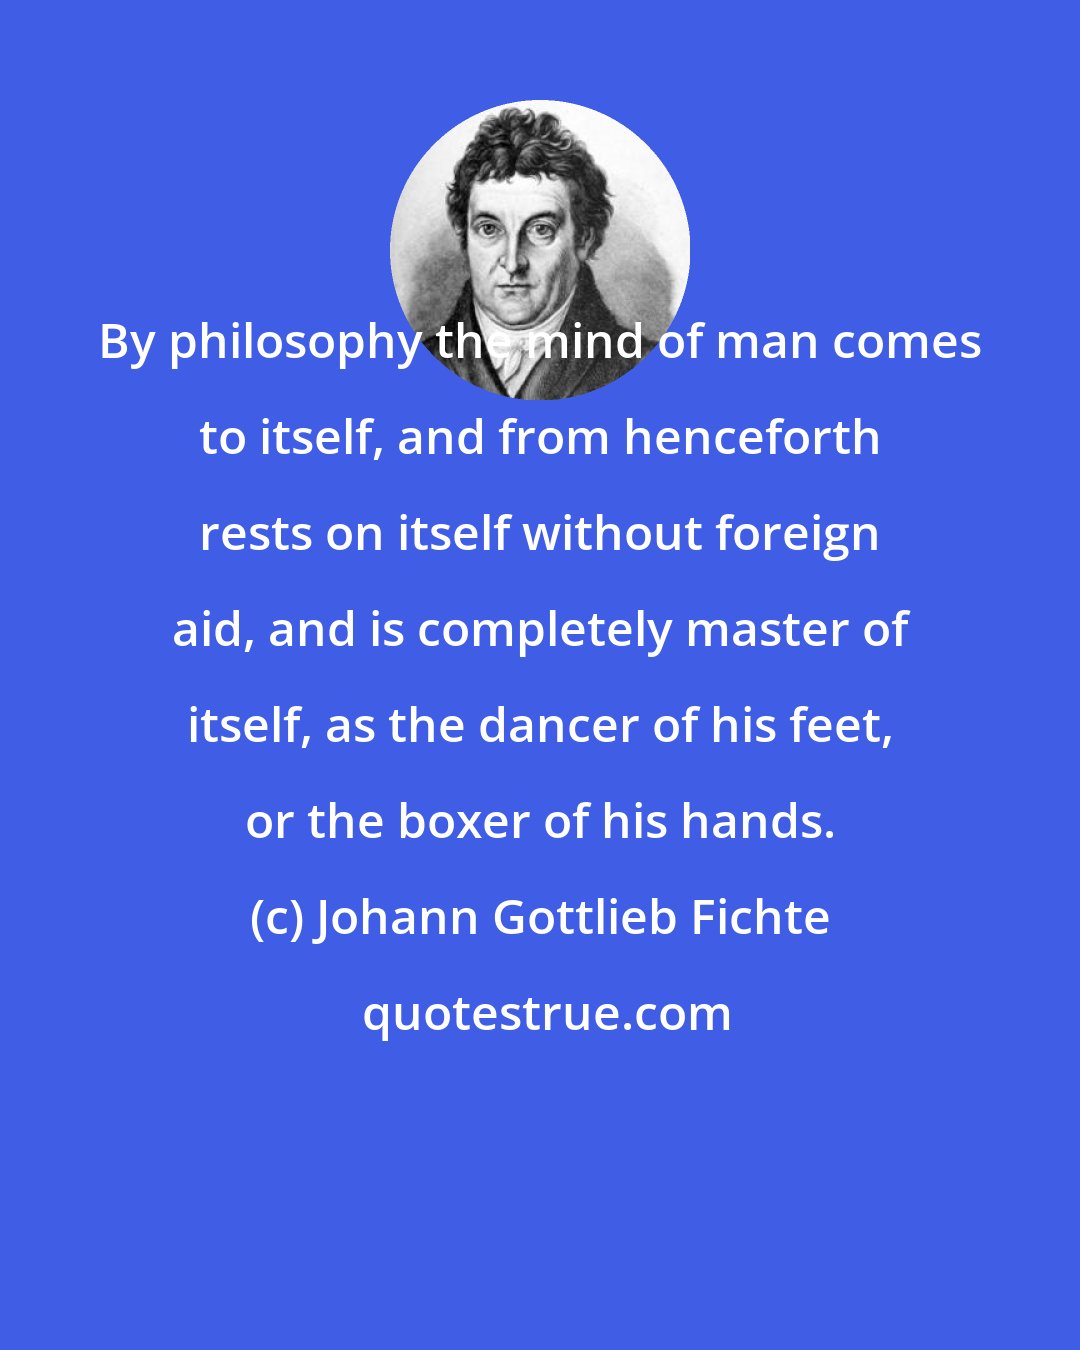 Johann Gottlieb Fichte: By philosophy the mind of man comes to itself, and from henceforth rests on itself without foreign aid, and is completely master of itself, as the dancer of his feet, or the boxer of his hands.